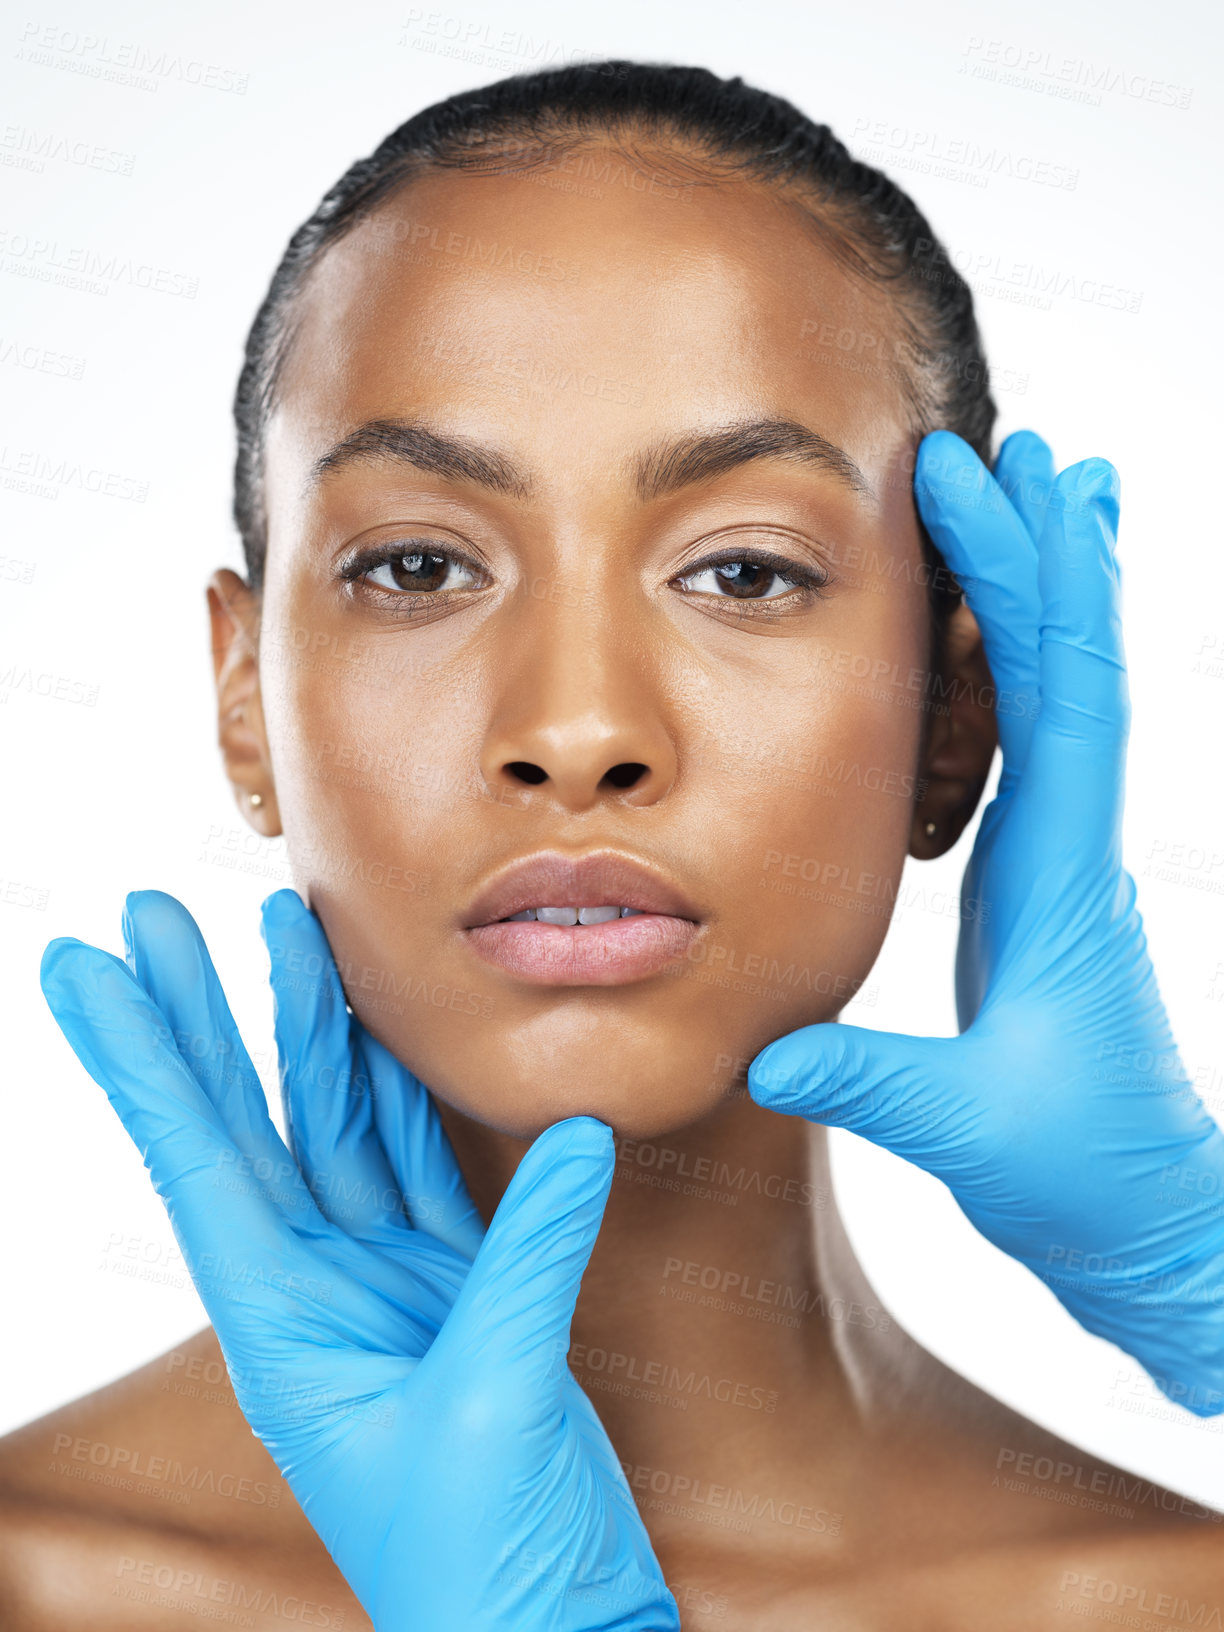 Buy stock photo Studio closeup of an attractive young woman getting her face touched by an unrecognizable person's hands wearing surgical gloves